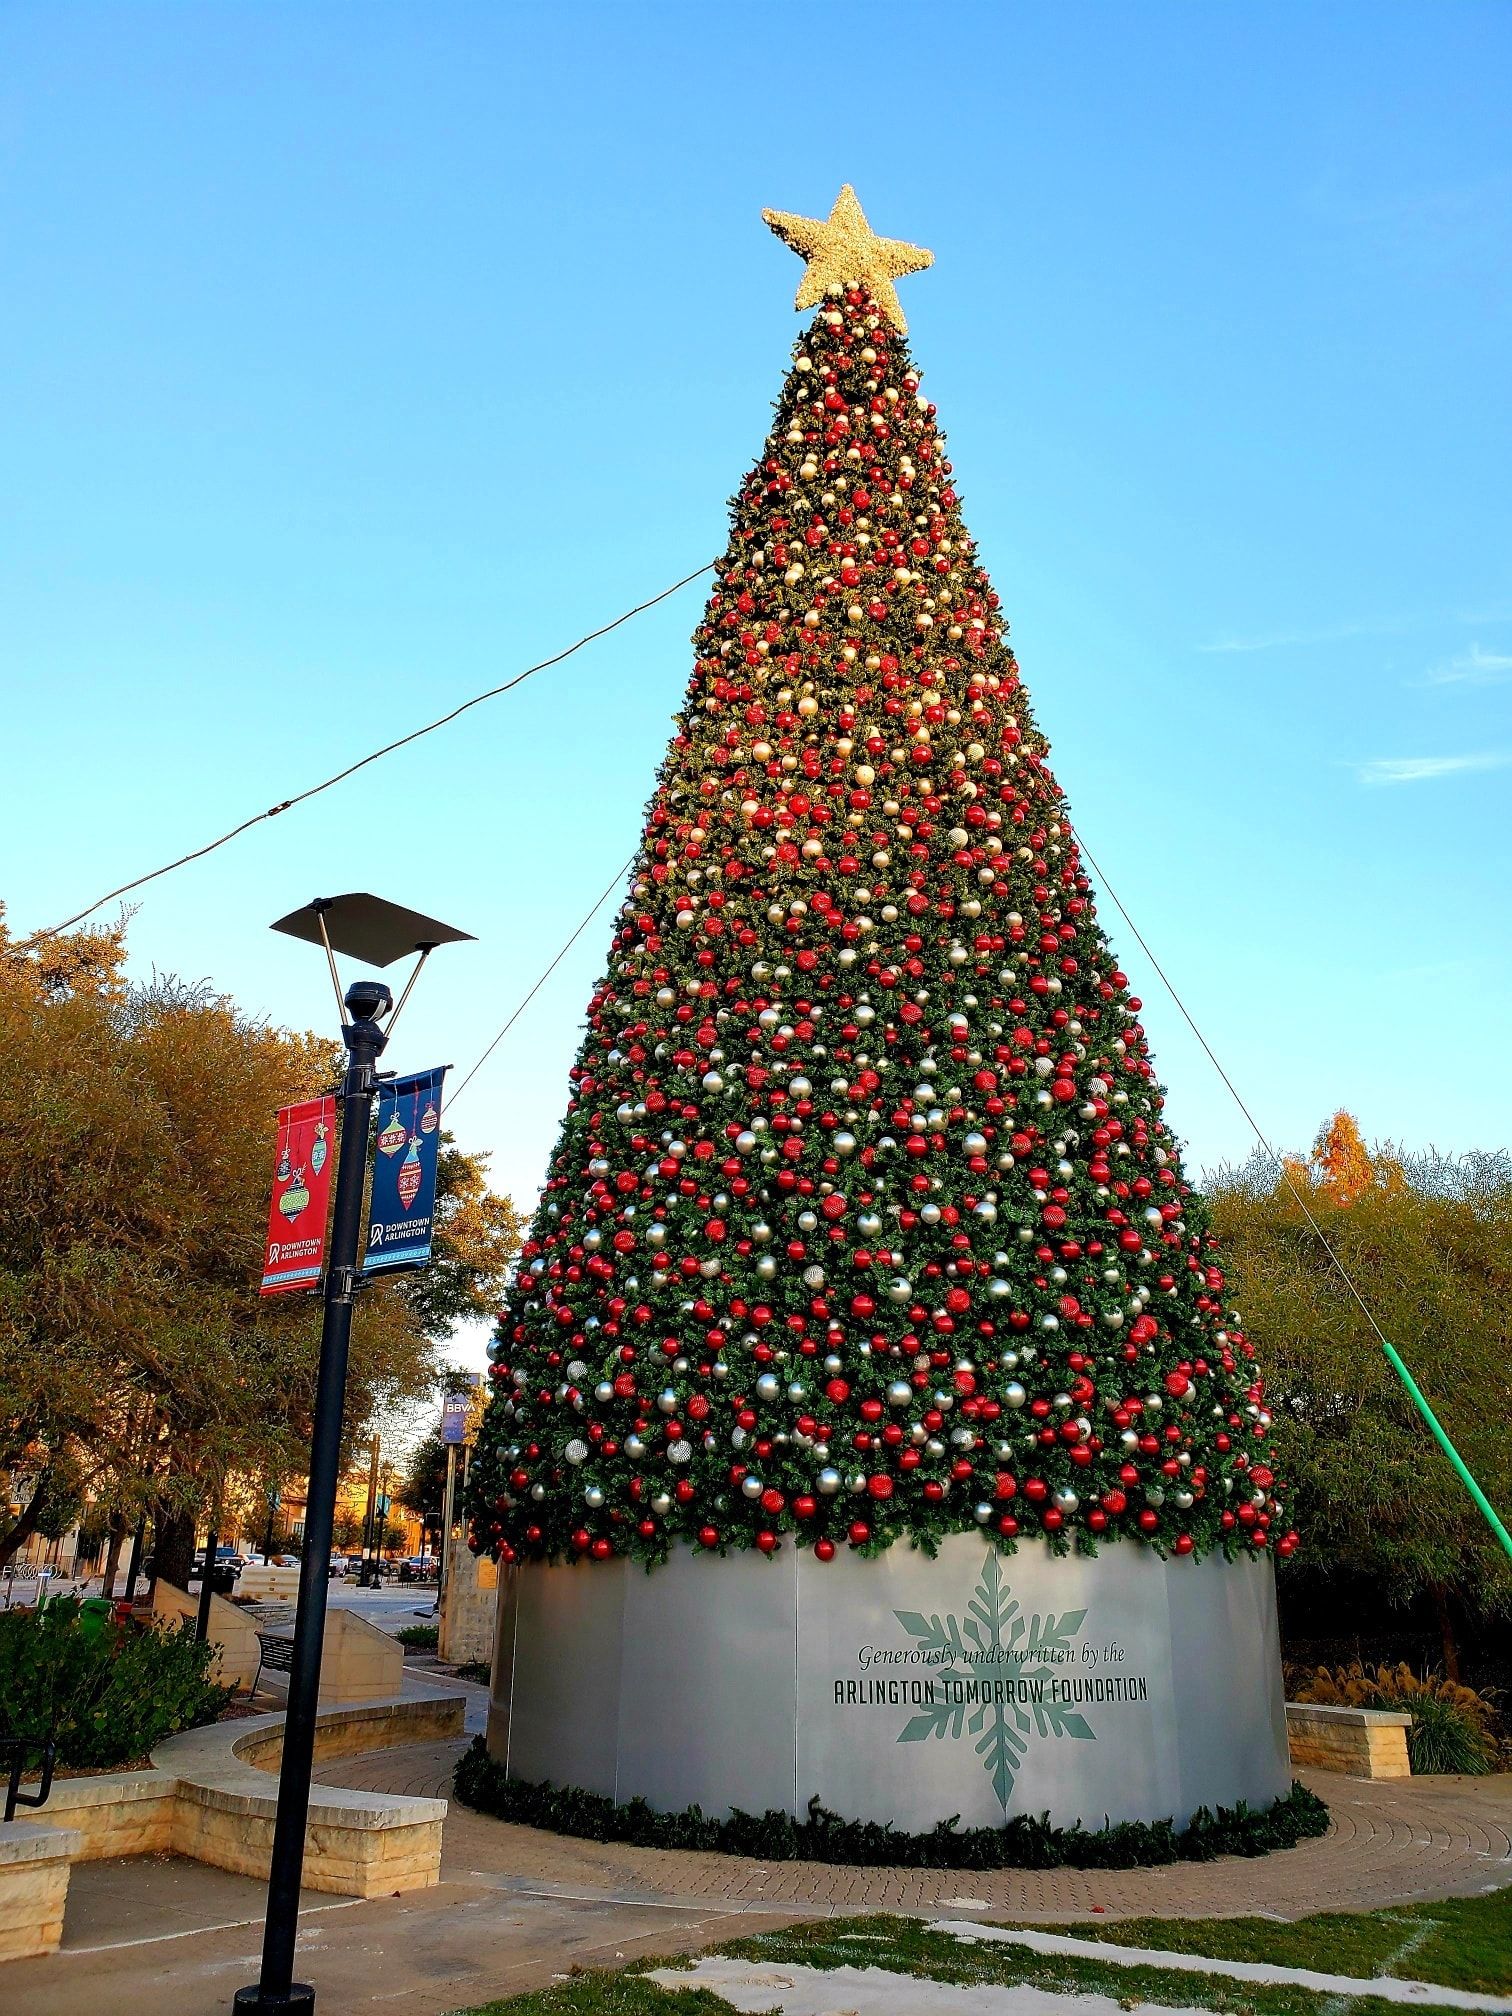 Discover 25 Days of HoHoHoliday Cheer in Downtown Arlington